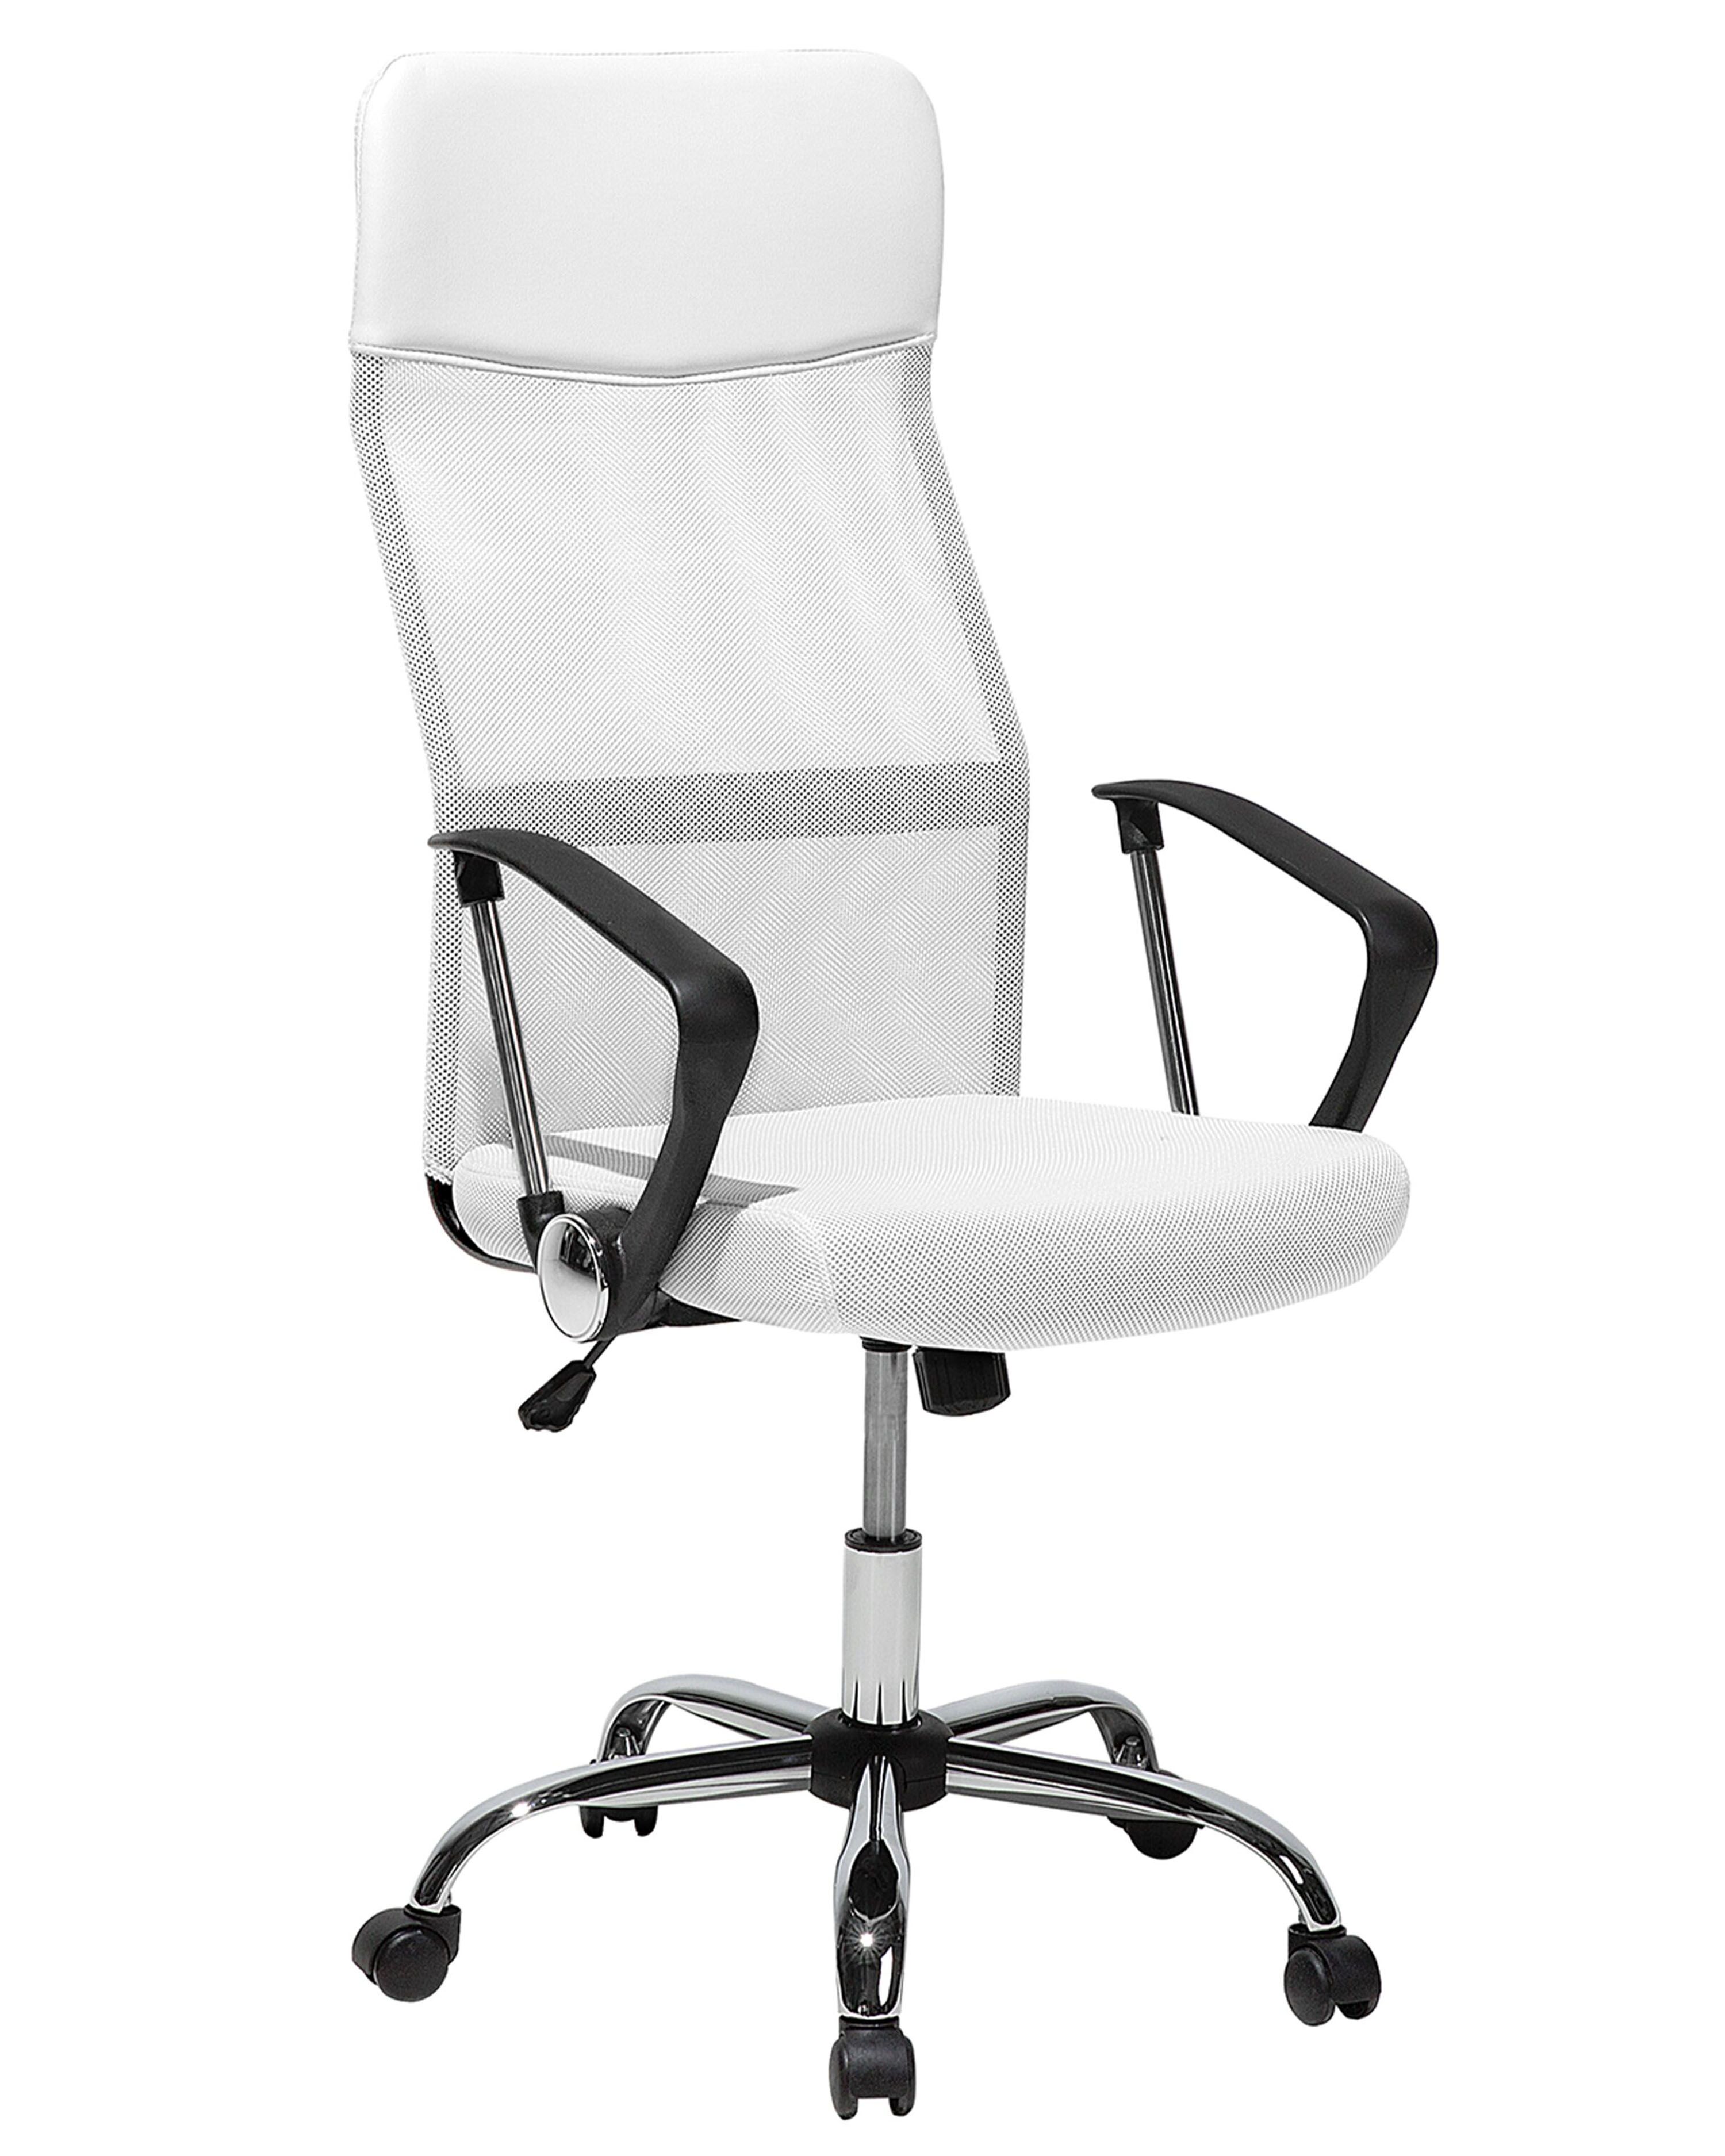 White leather office chair – BDSons